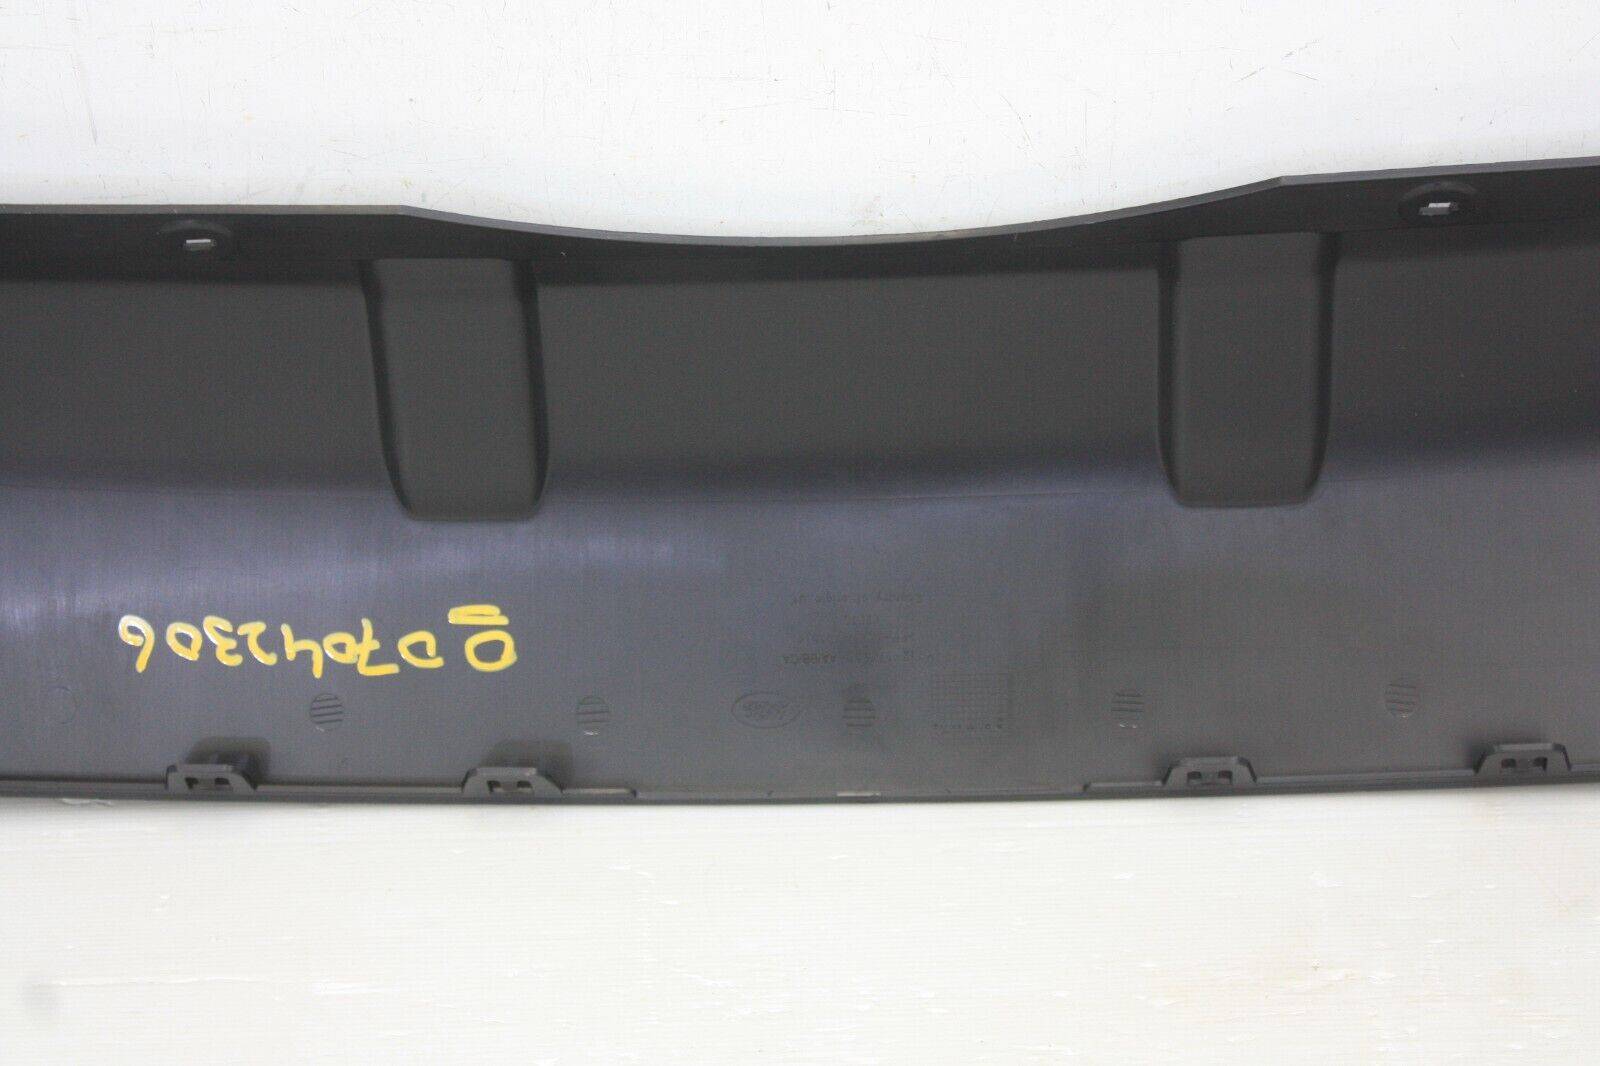 Land-Rover-Discovery-Rear-Bumper-Tow-Eye-Cover-2017-ON-HY32-17K950-AA-Genuine-175681063463-9